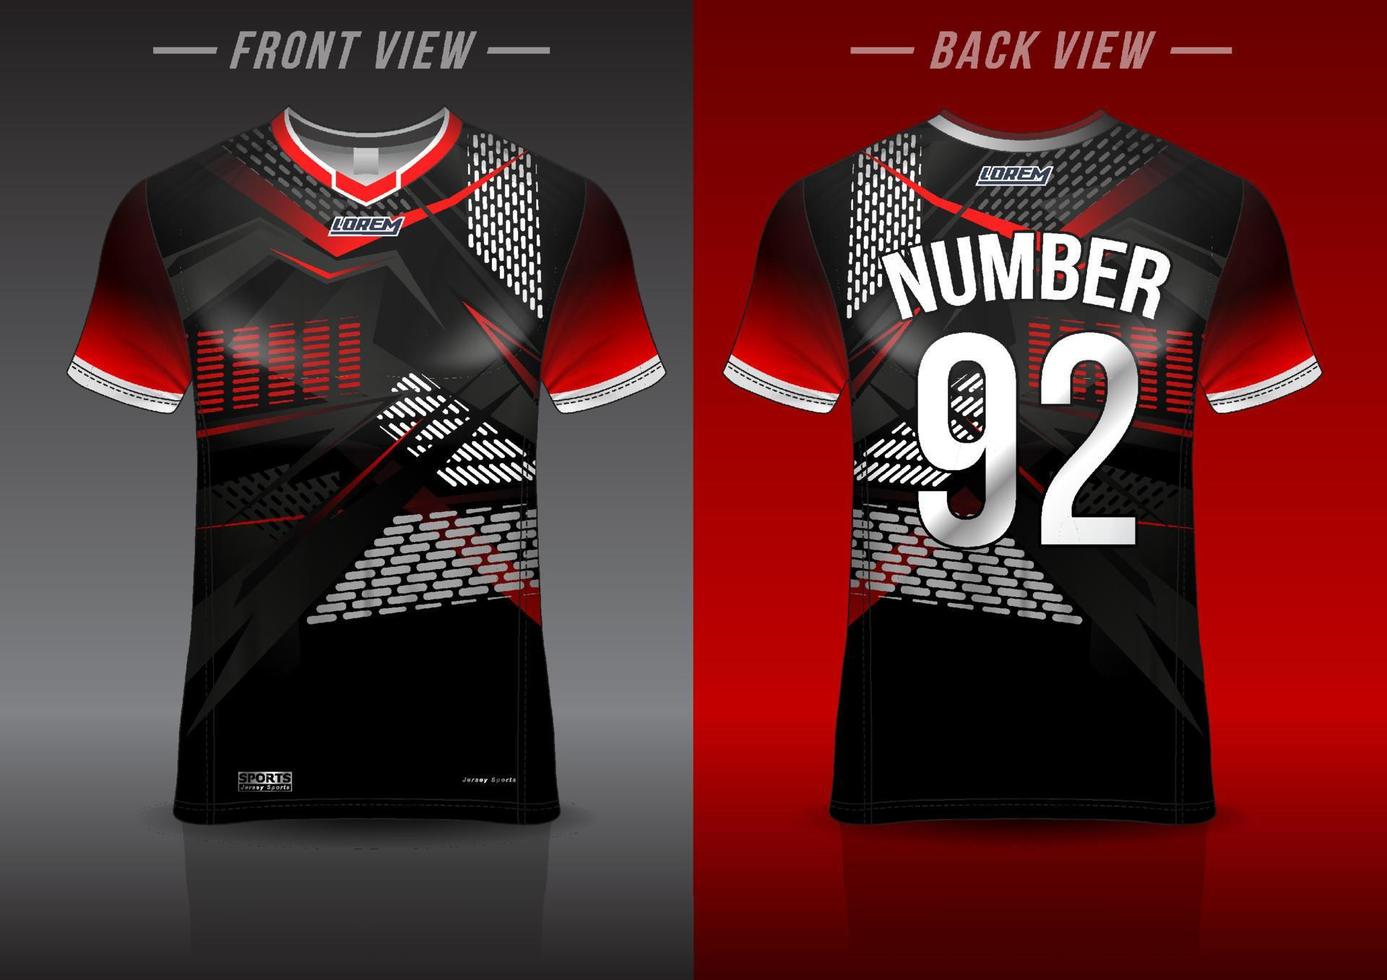 jersey sport shirt template design for soccer Sport, basket ball, running uniform in front view, back view. Shirt mockup Vector, design very simple and easy to custom vector